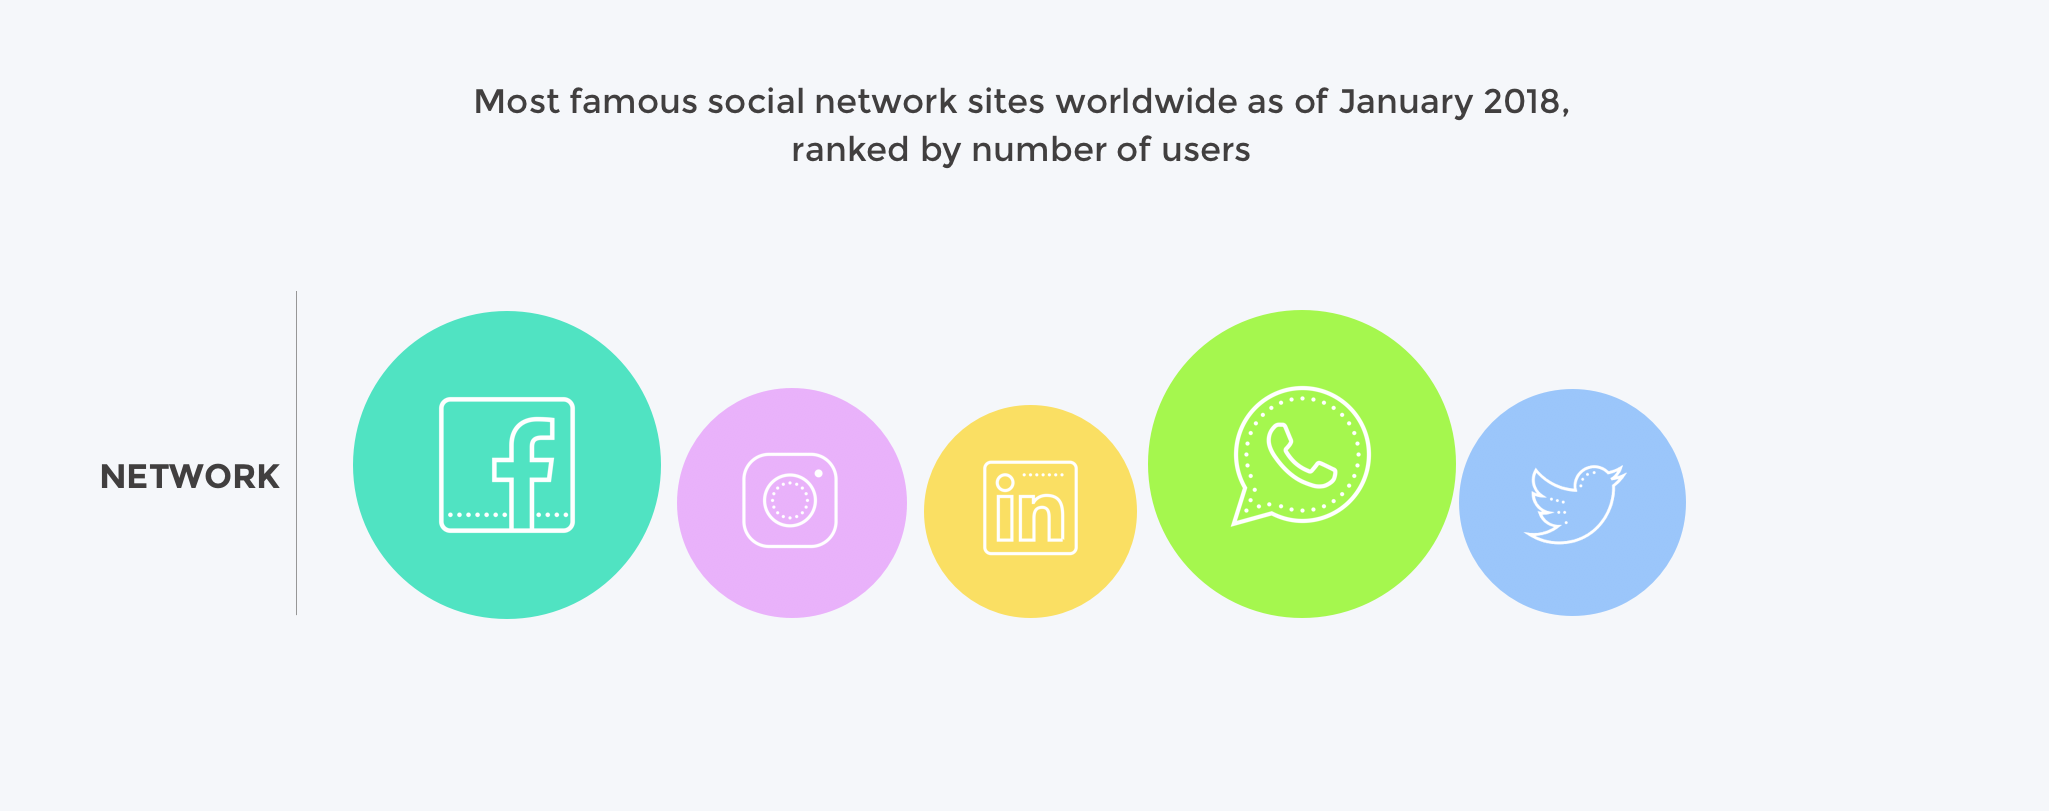 An infographic showing lightly colored circles of various sizes to indicate the size of five different social networks